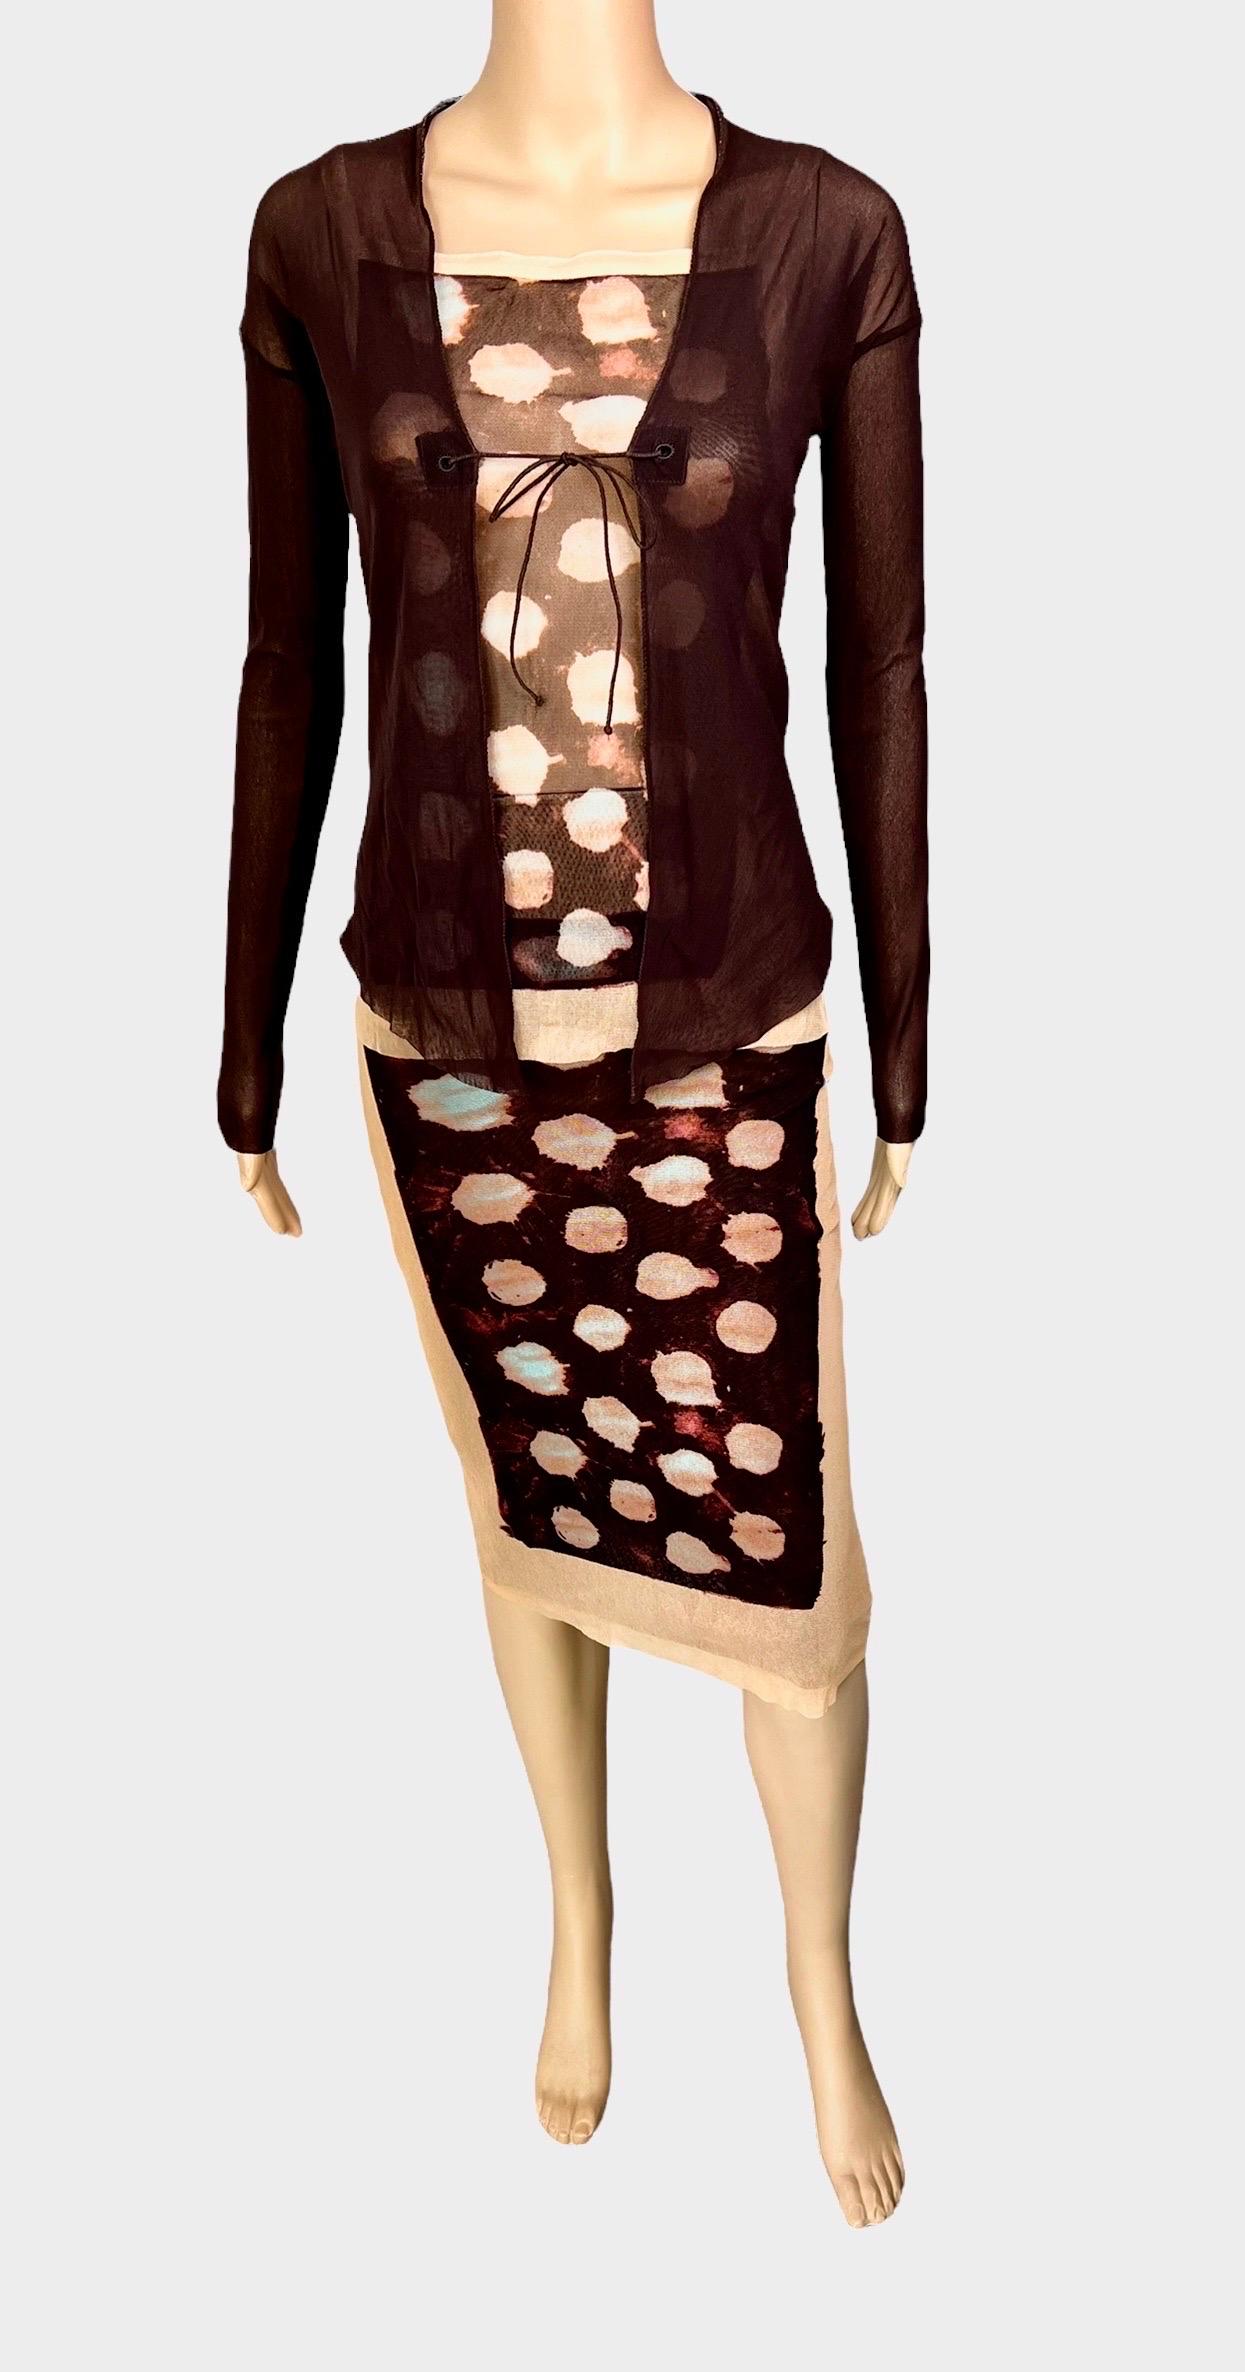 Jean Paul Gaultier S/S 2001 Sheer Polka Dot Cardigan Top and Skirt 3 Piece Set In Good Condition For Sale In Naples, FL